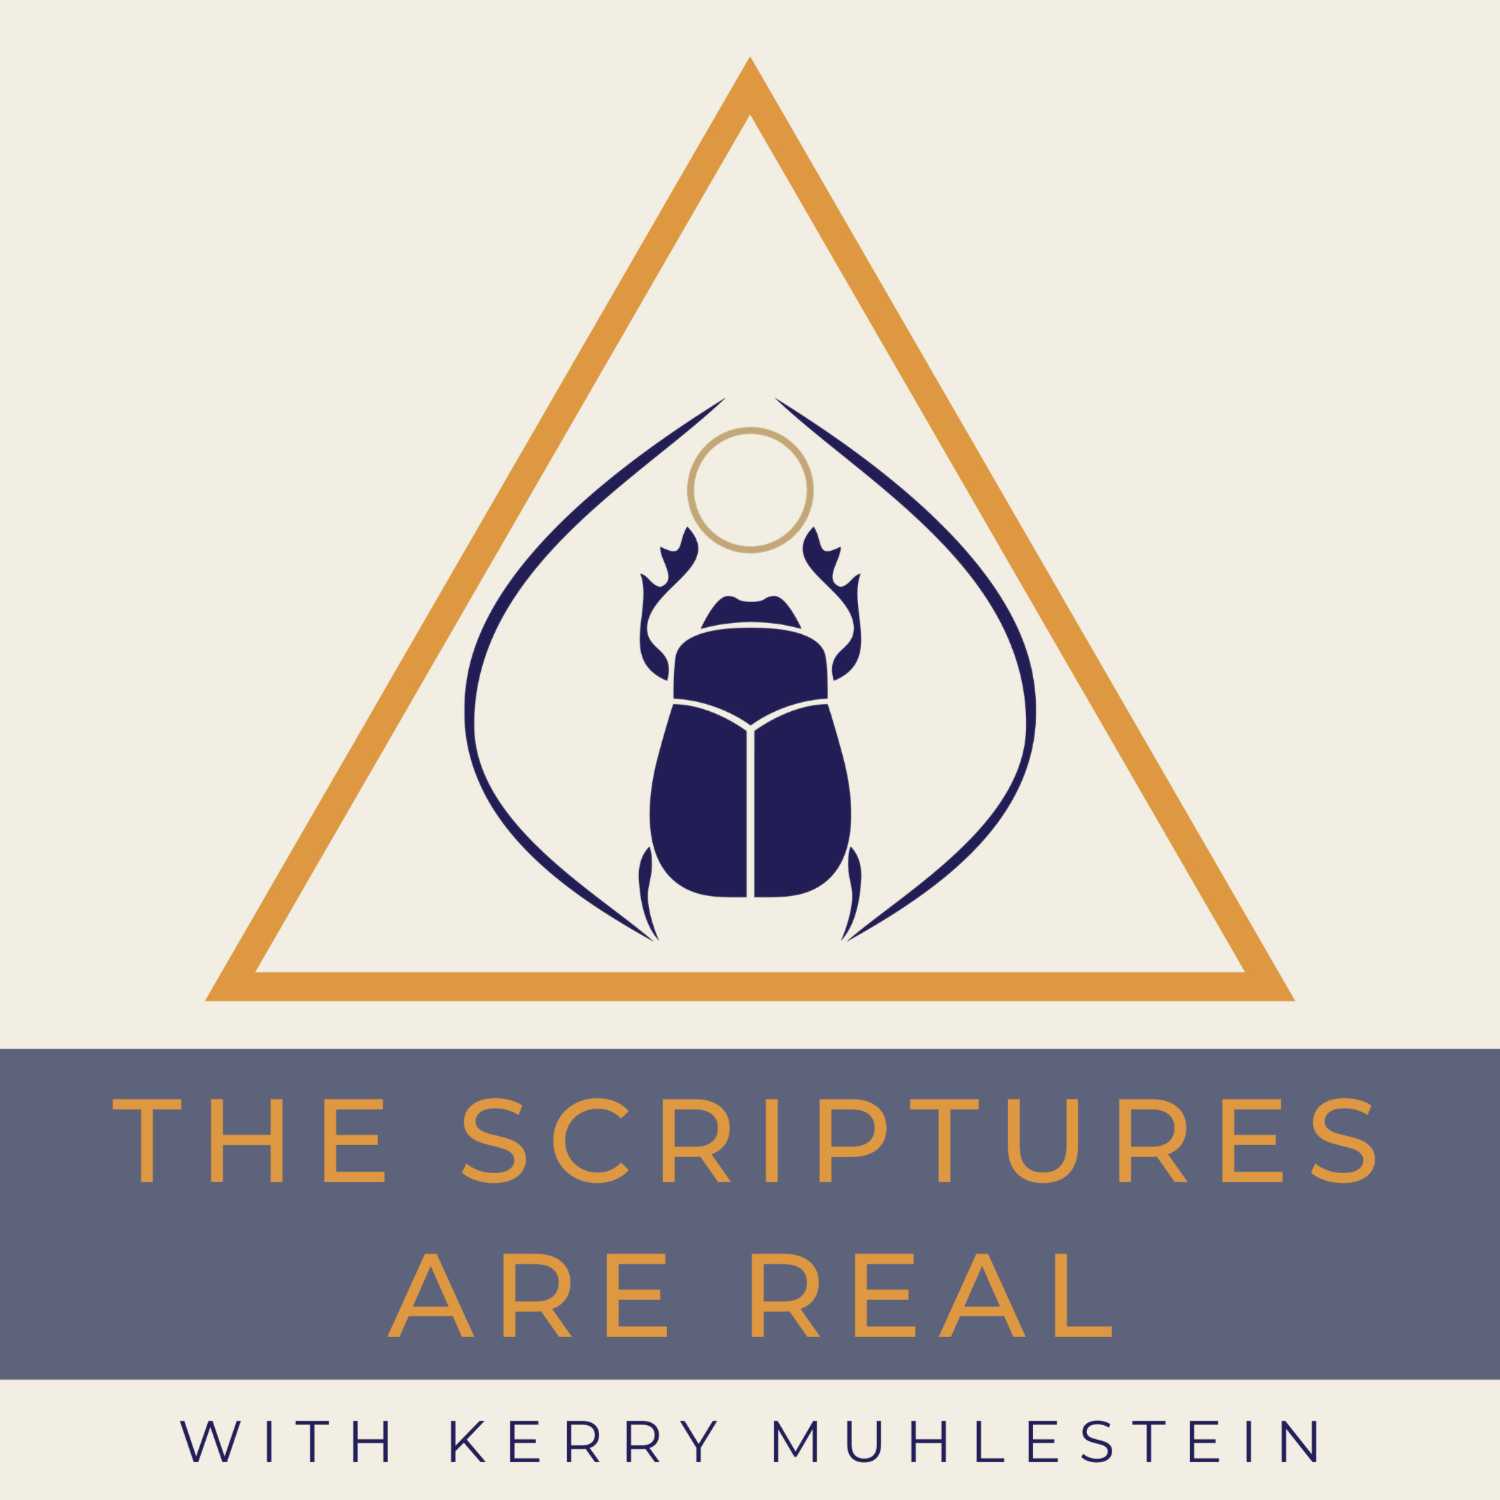 RaeLynn on Capernaum and Christ as a Healer (week of March 6, first to listen to)